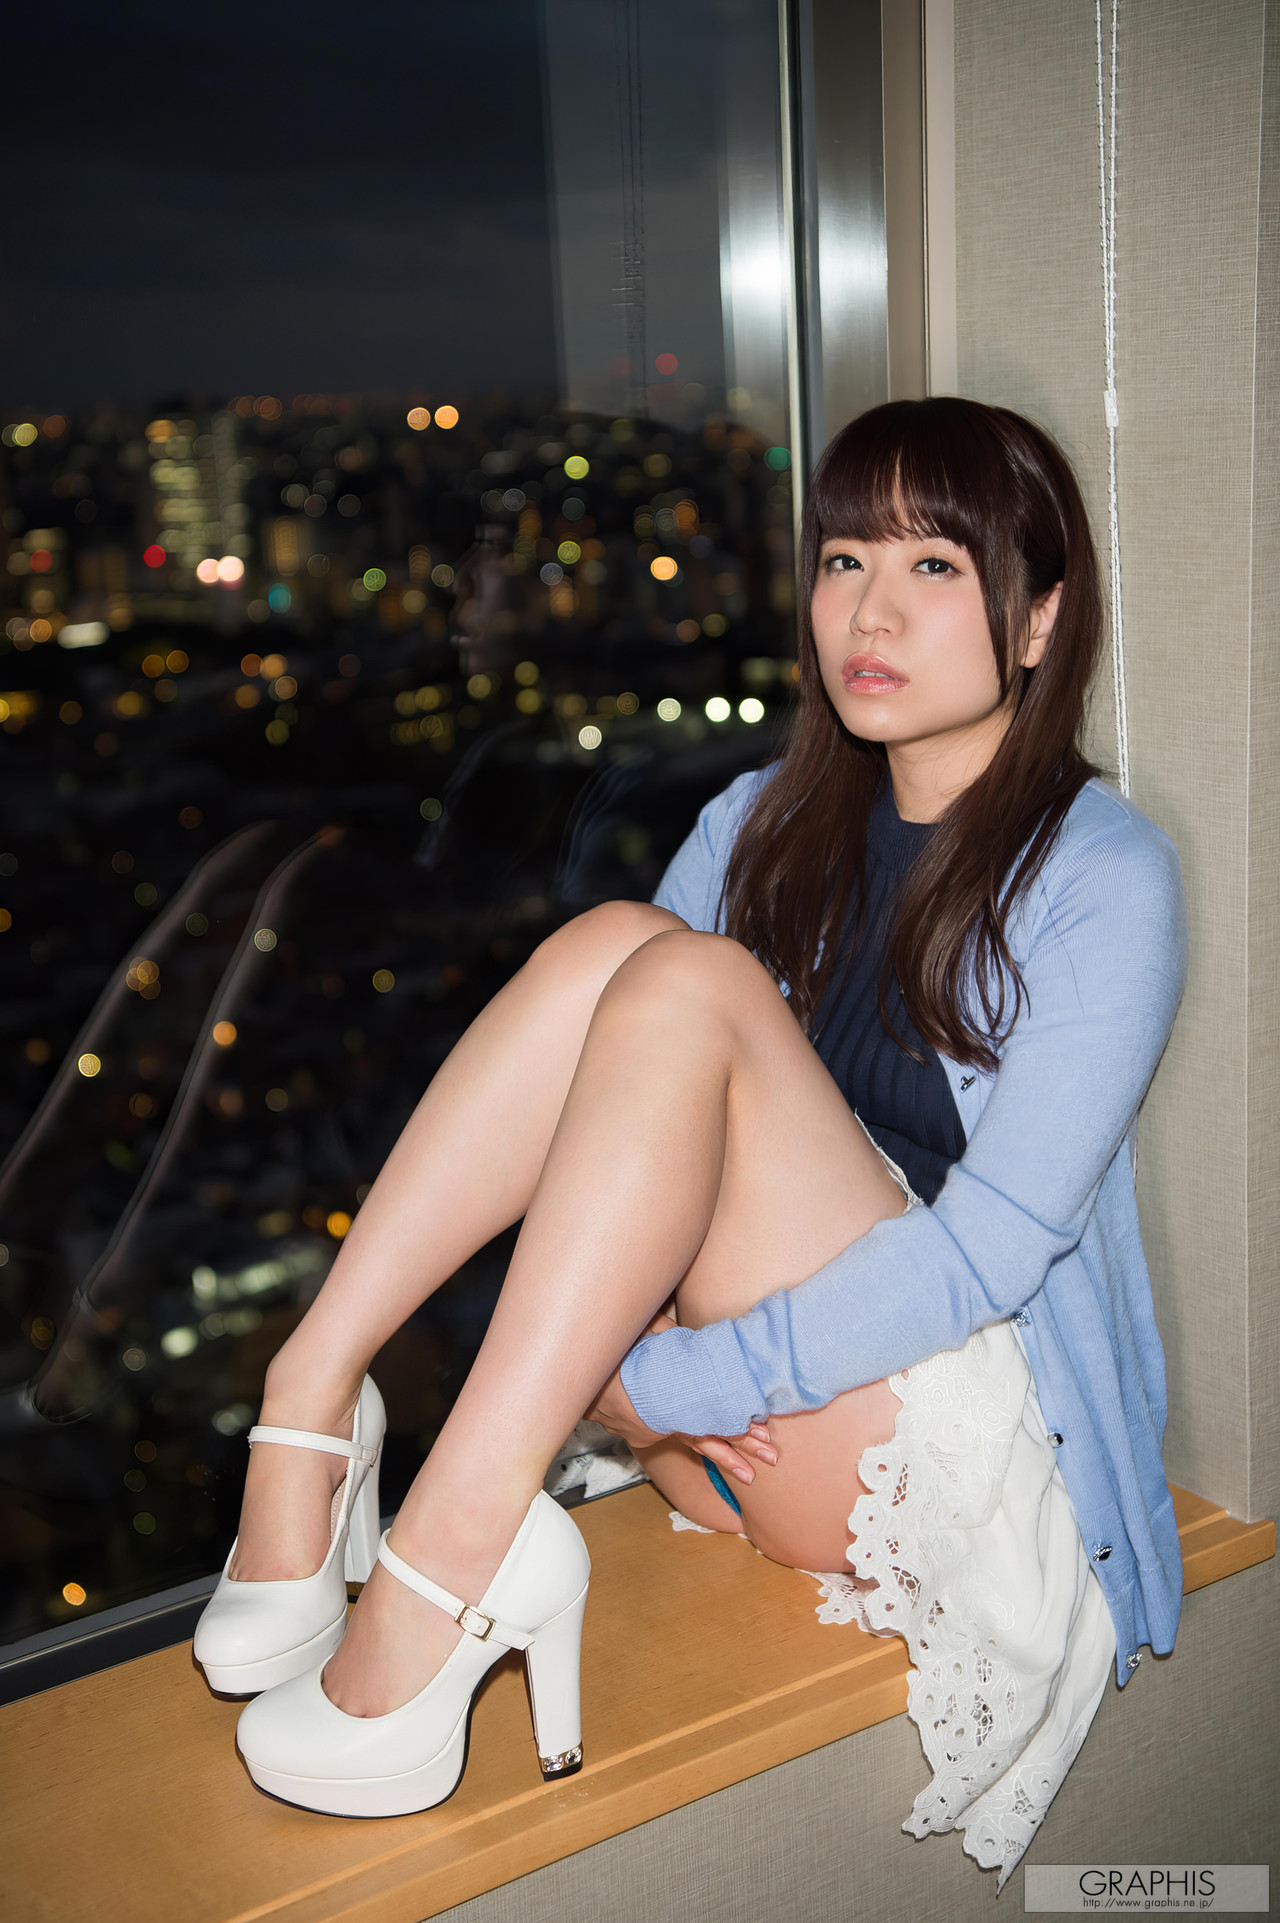 Rin Hatsumi 初美りん, [Graphis] Gals 『Look at me!』 Vol.02